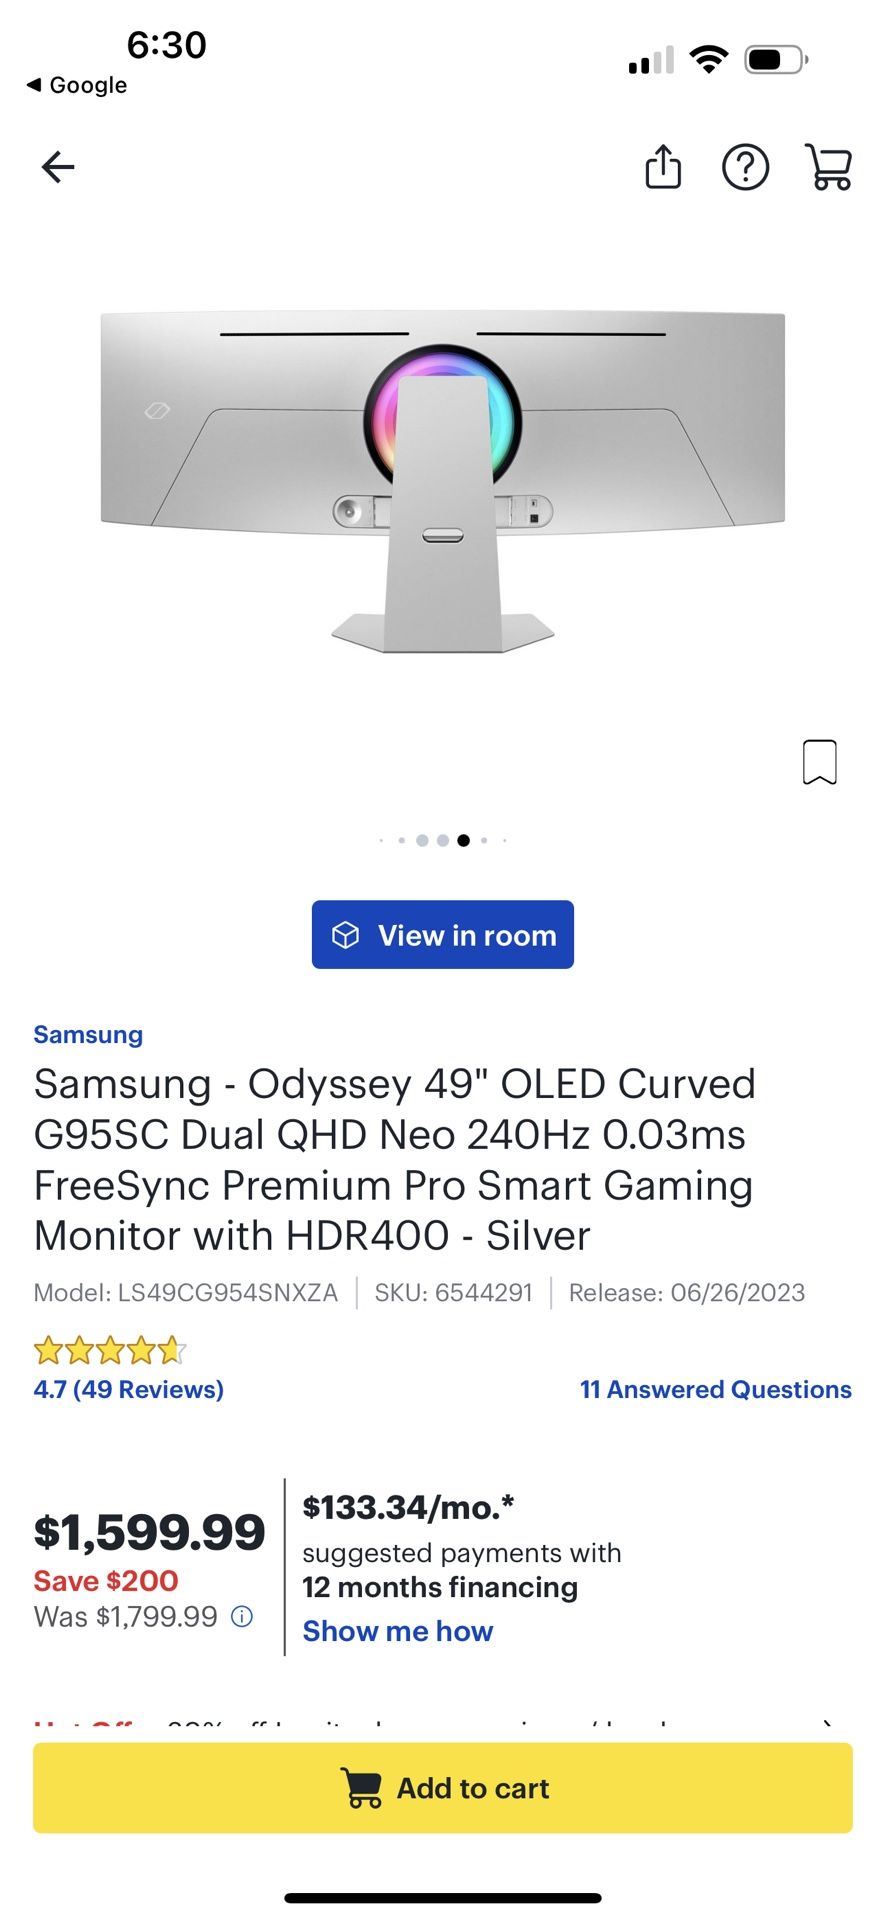 Samsung - Odyssey 49" OLED Curved G95SC Dual QHD Neo 240Hz 0.03ms FreeSync Premium Pro Smart Gaming Monitor with HDR400 - Silver